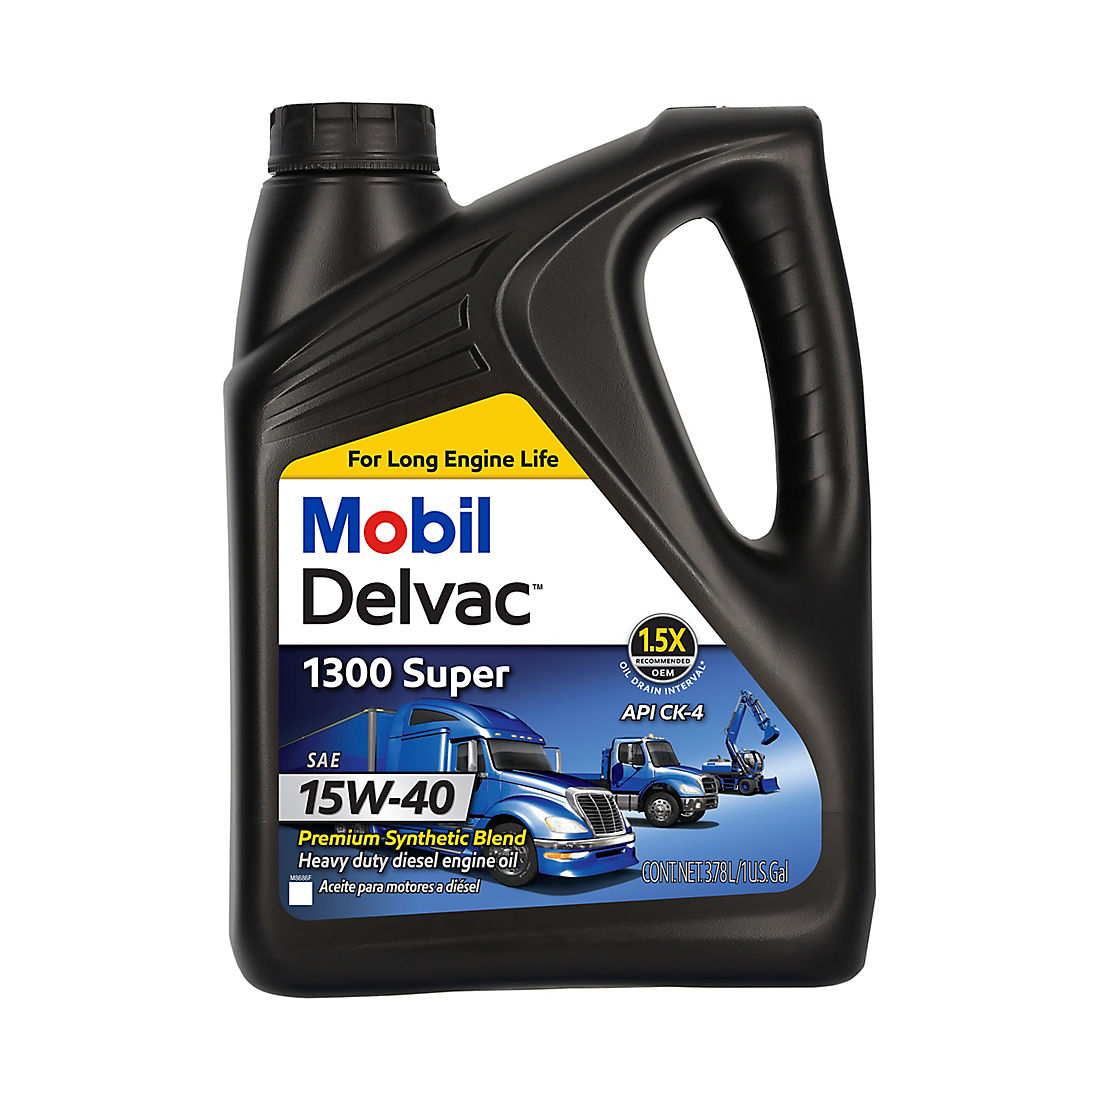 Какое масло 15w40. Mobil Delvac 10w 40 Diesel. Mobil 10w 40 Synthetic engine Oil. Мобил Делвак 10w 50. Oil Motor SAE 15w40.